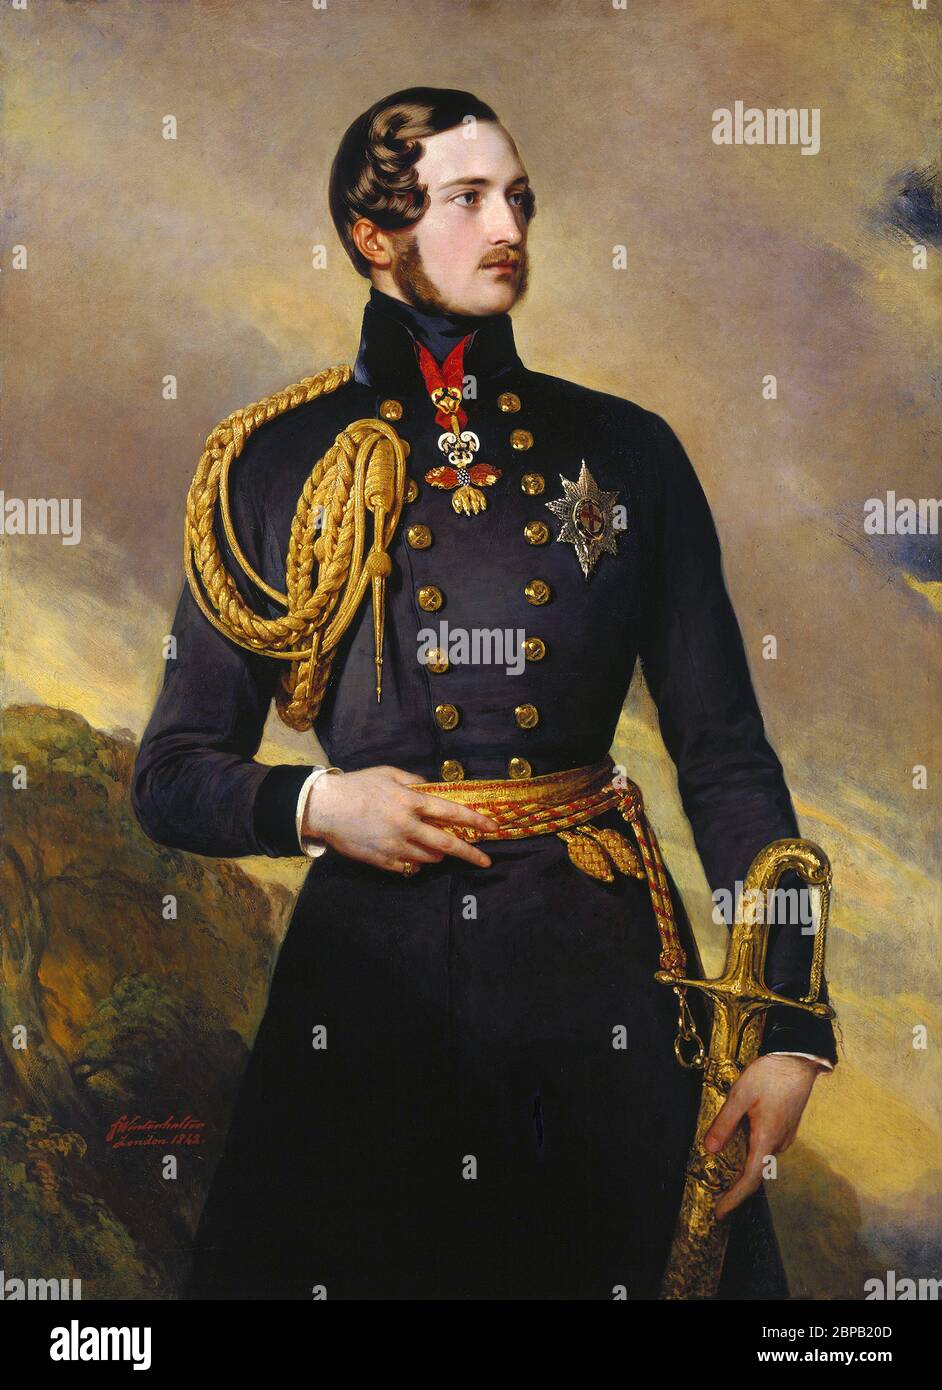 Prince Albert by Franz Xaver Winterhalter, oil on canvas, 1842. Prince Albert of Saxe-Coburg and Gotha (Francis Albert Augustus Charles Emmanue: 1819–1861) was Prince Consort as husband of Queen Victoria. Stock Photo